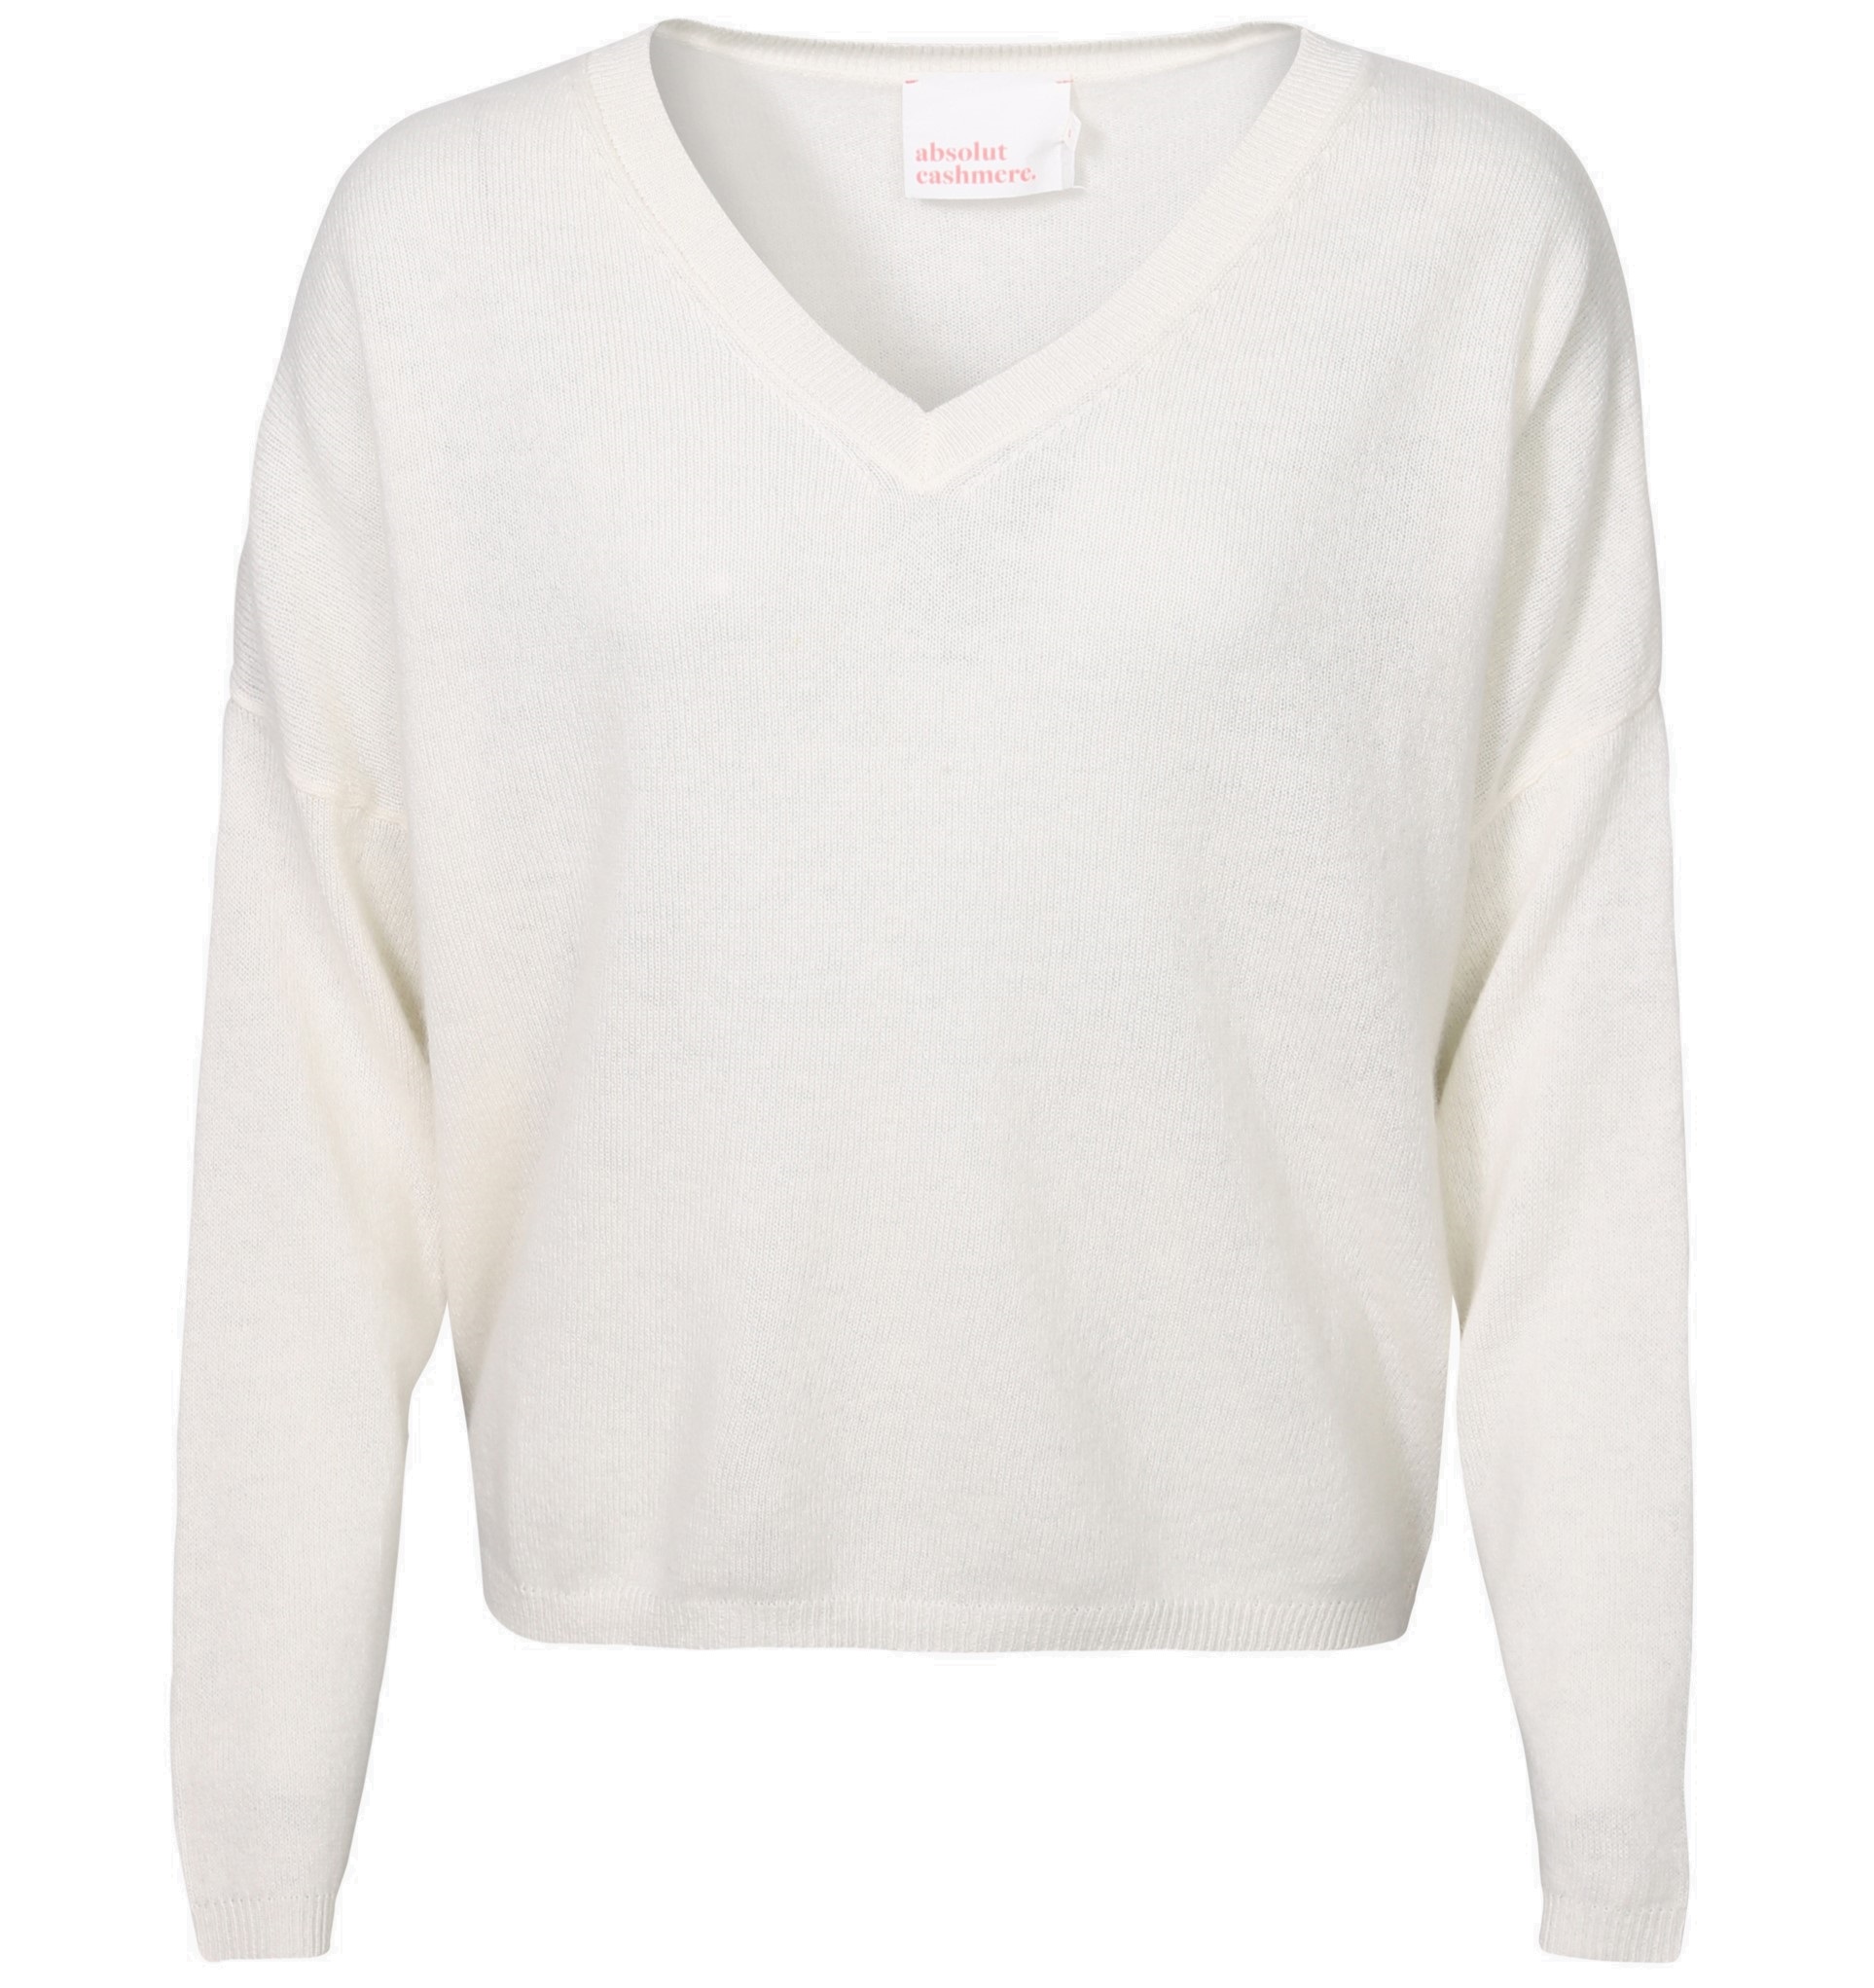 ABSOLUT CASHMERE V-Neck Sweater Alicia in Offwhite XS